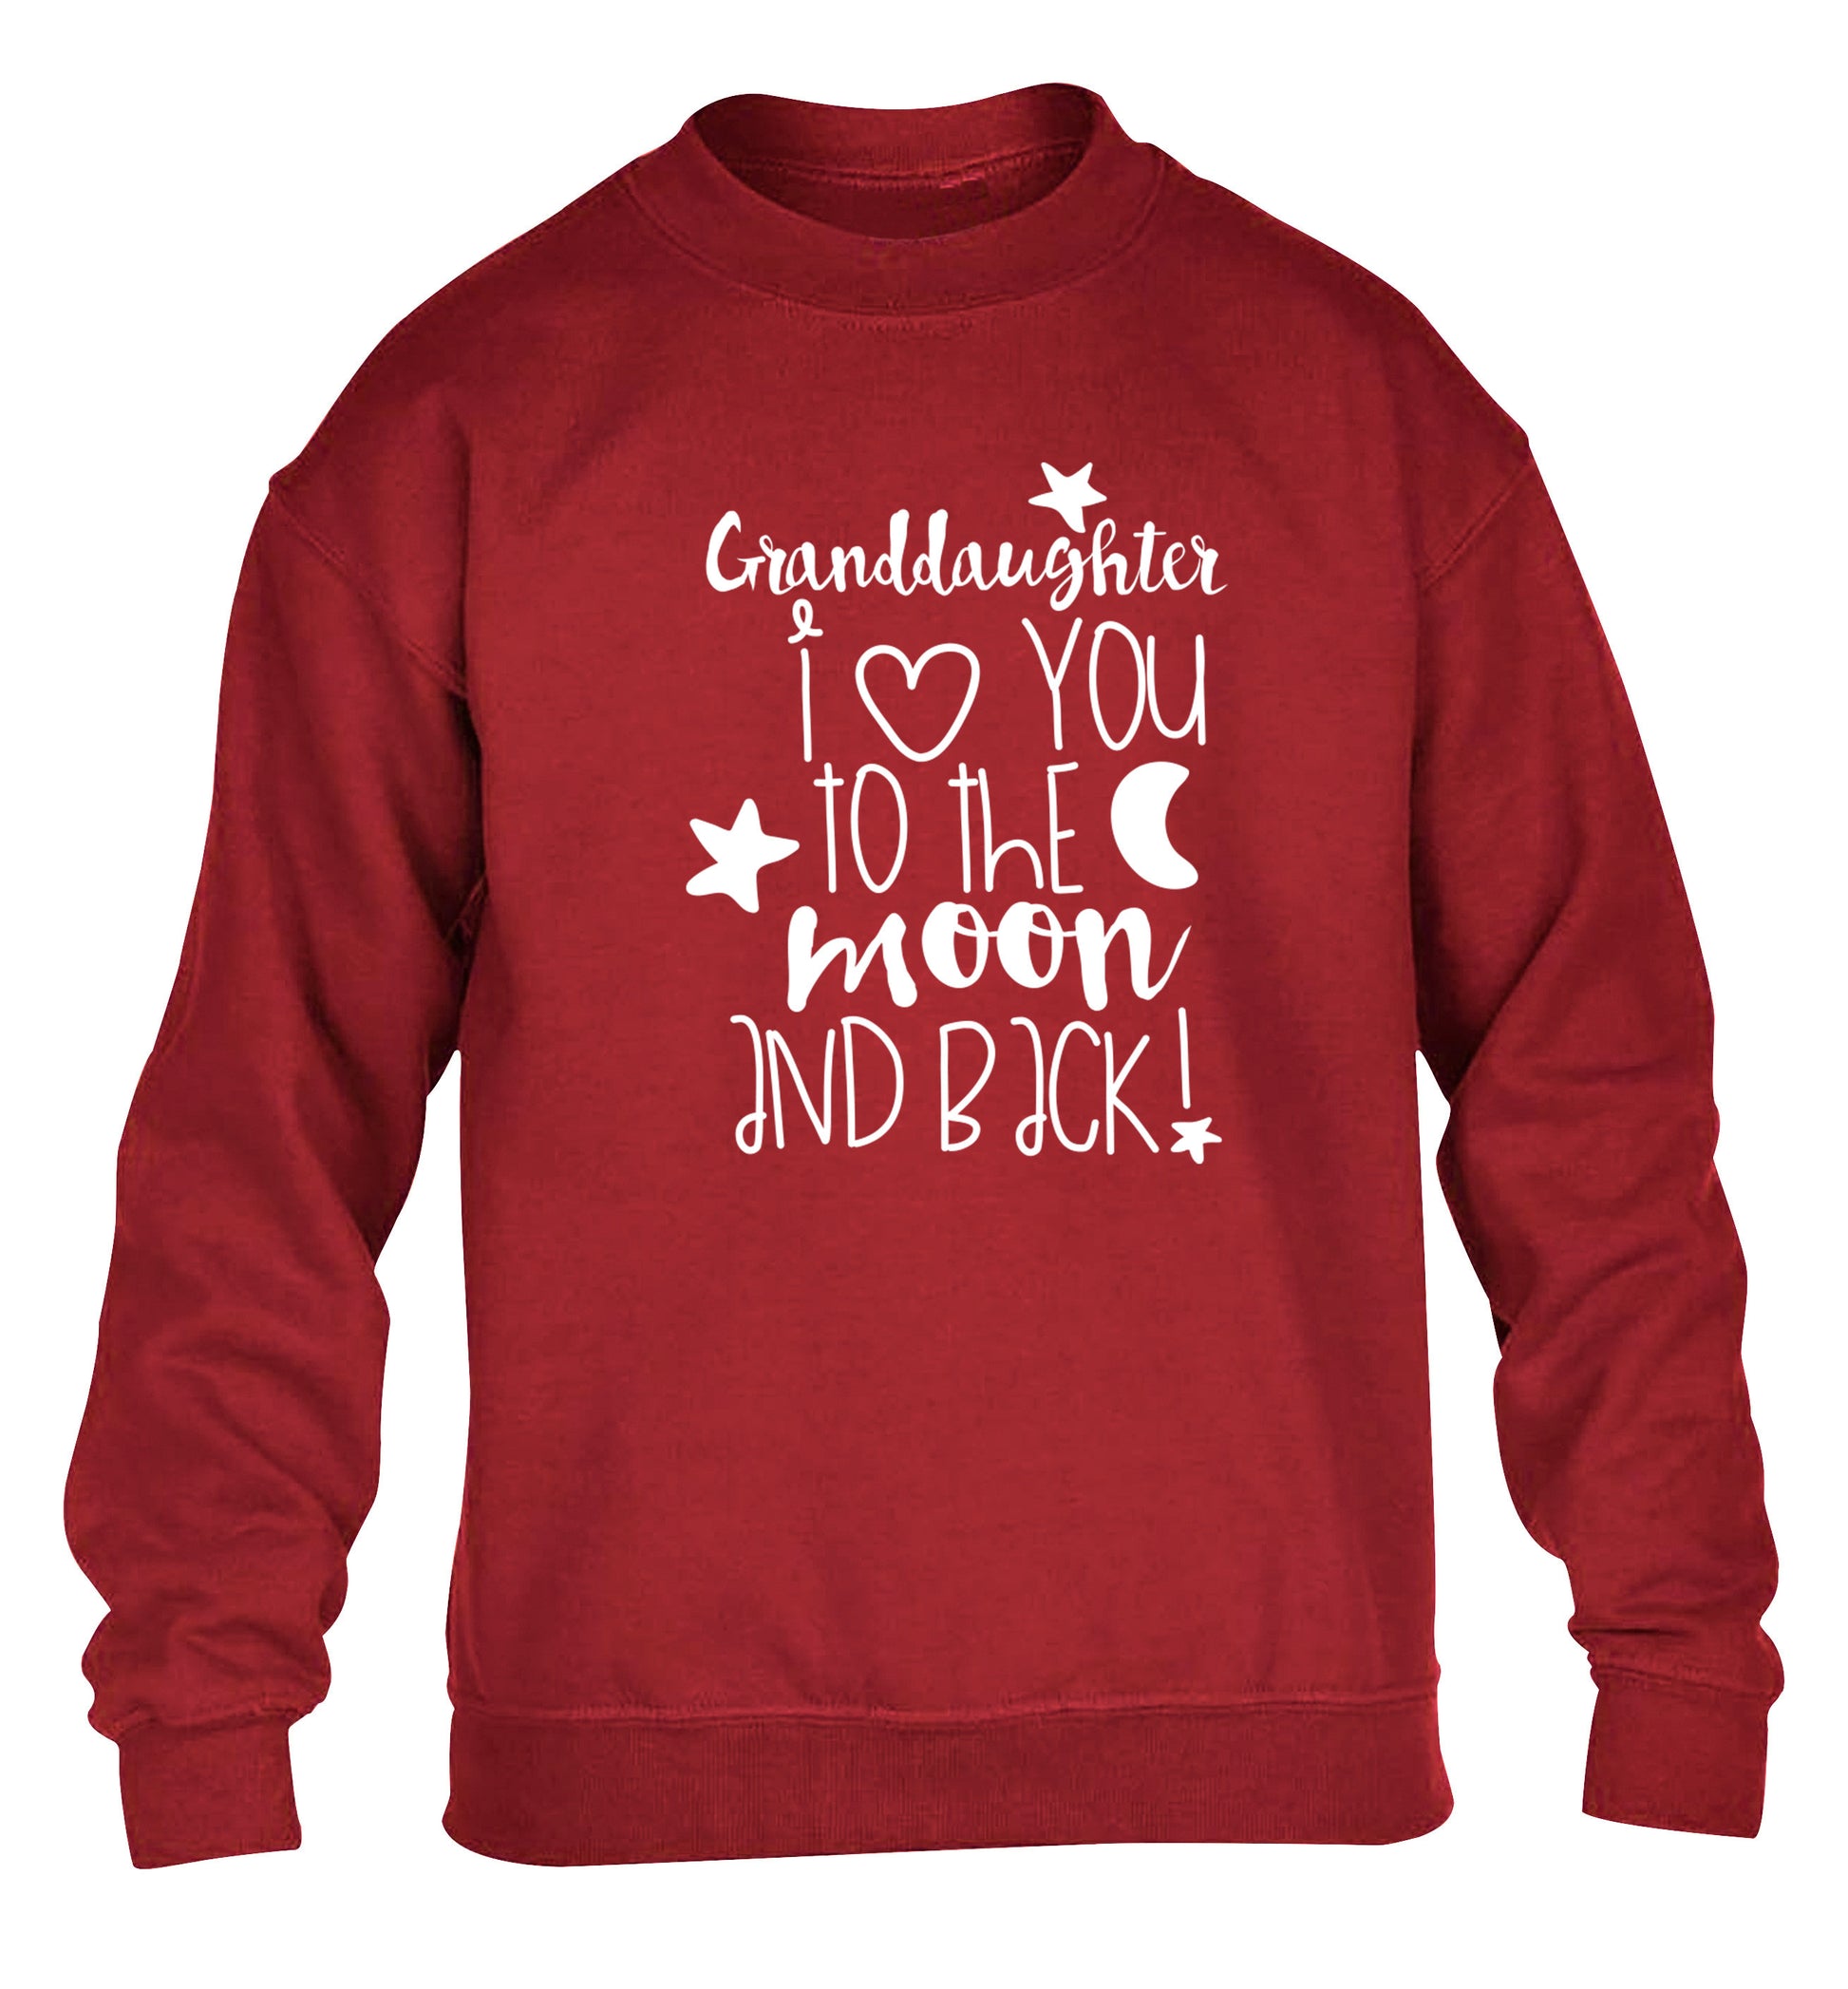 Granddaughter I love you to the moon and back children's grey  sweater 12-14 Years